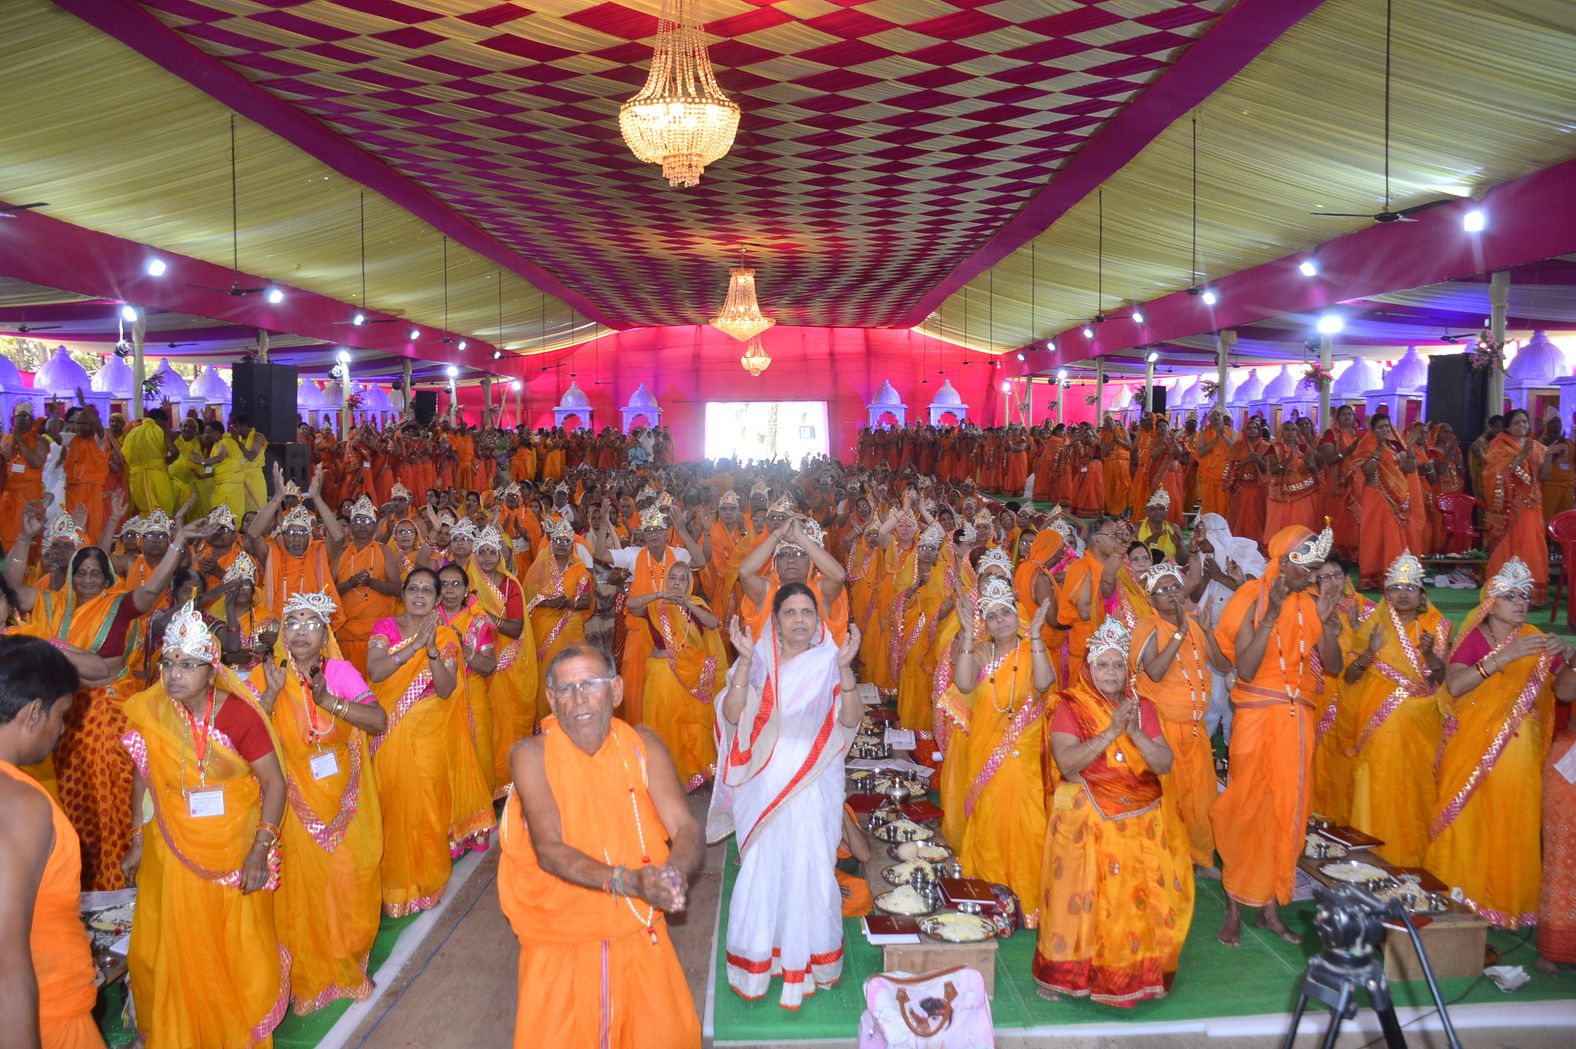 The event took place in Bawangaja